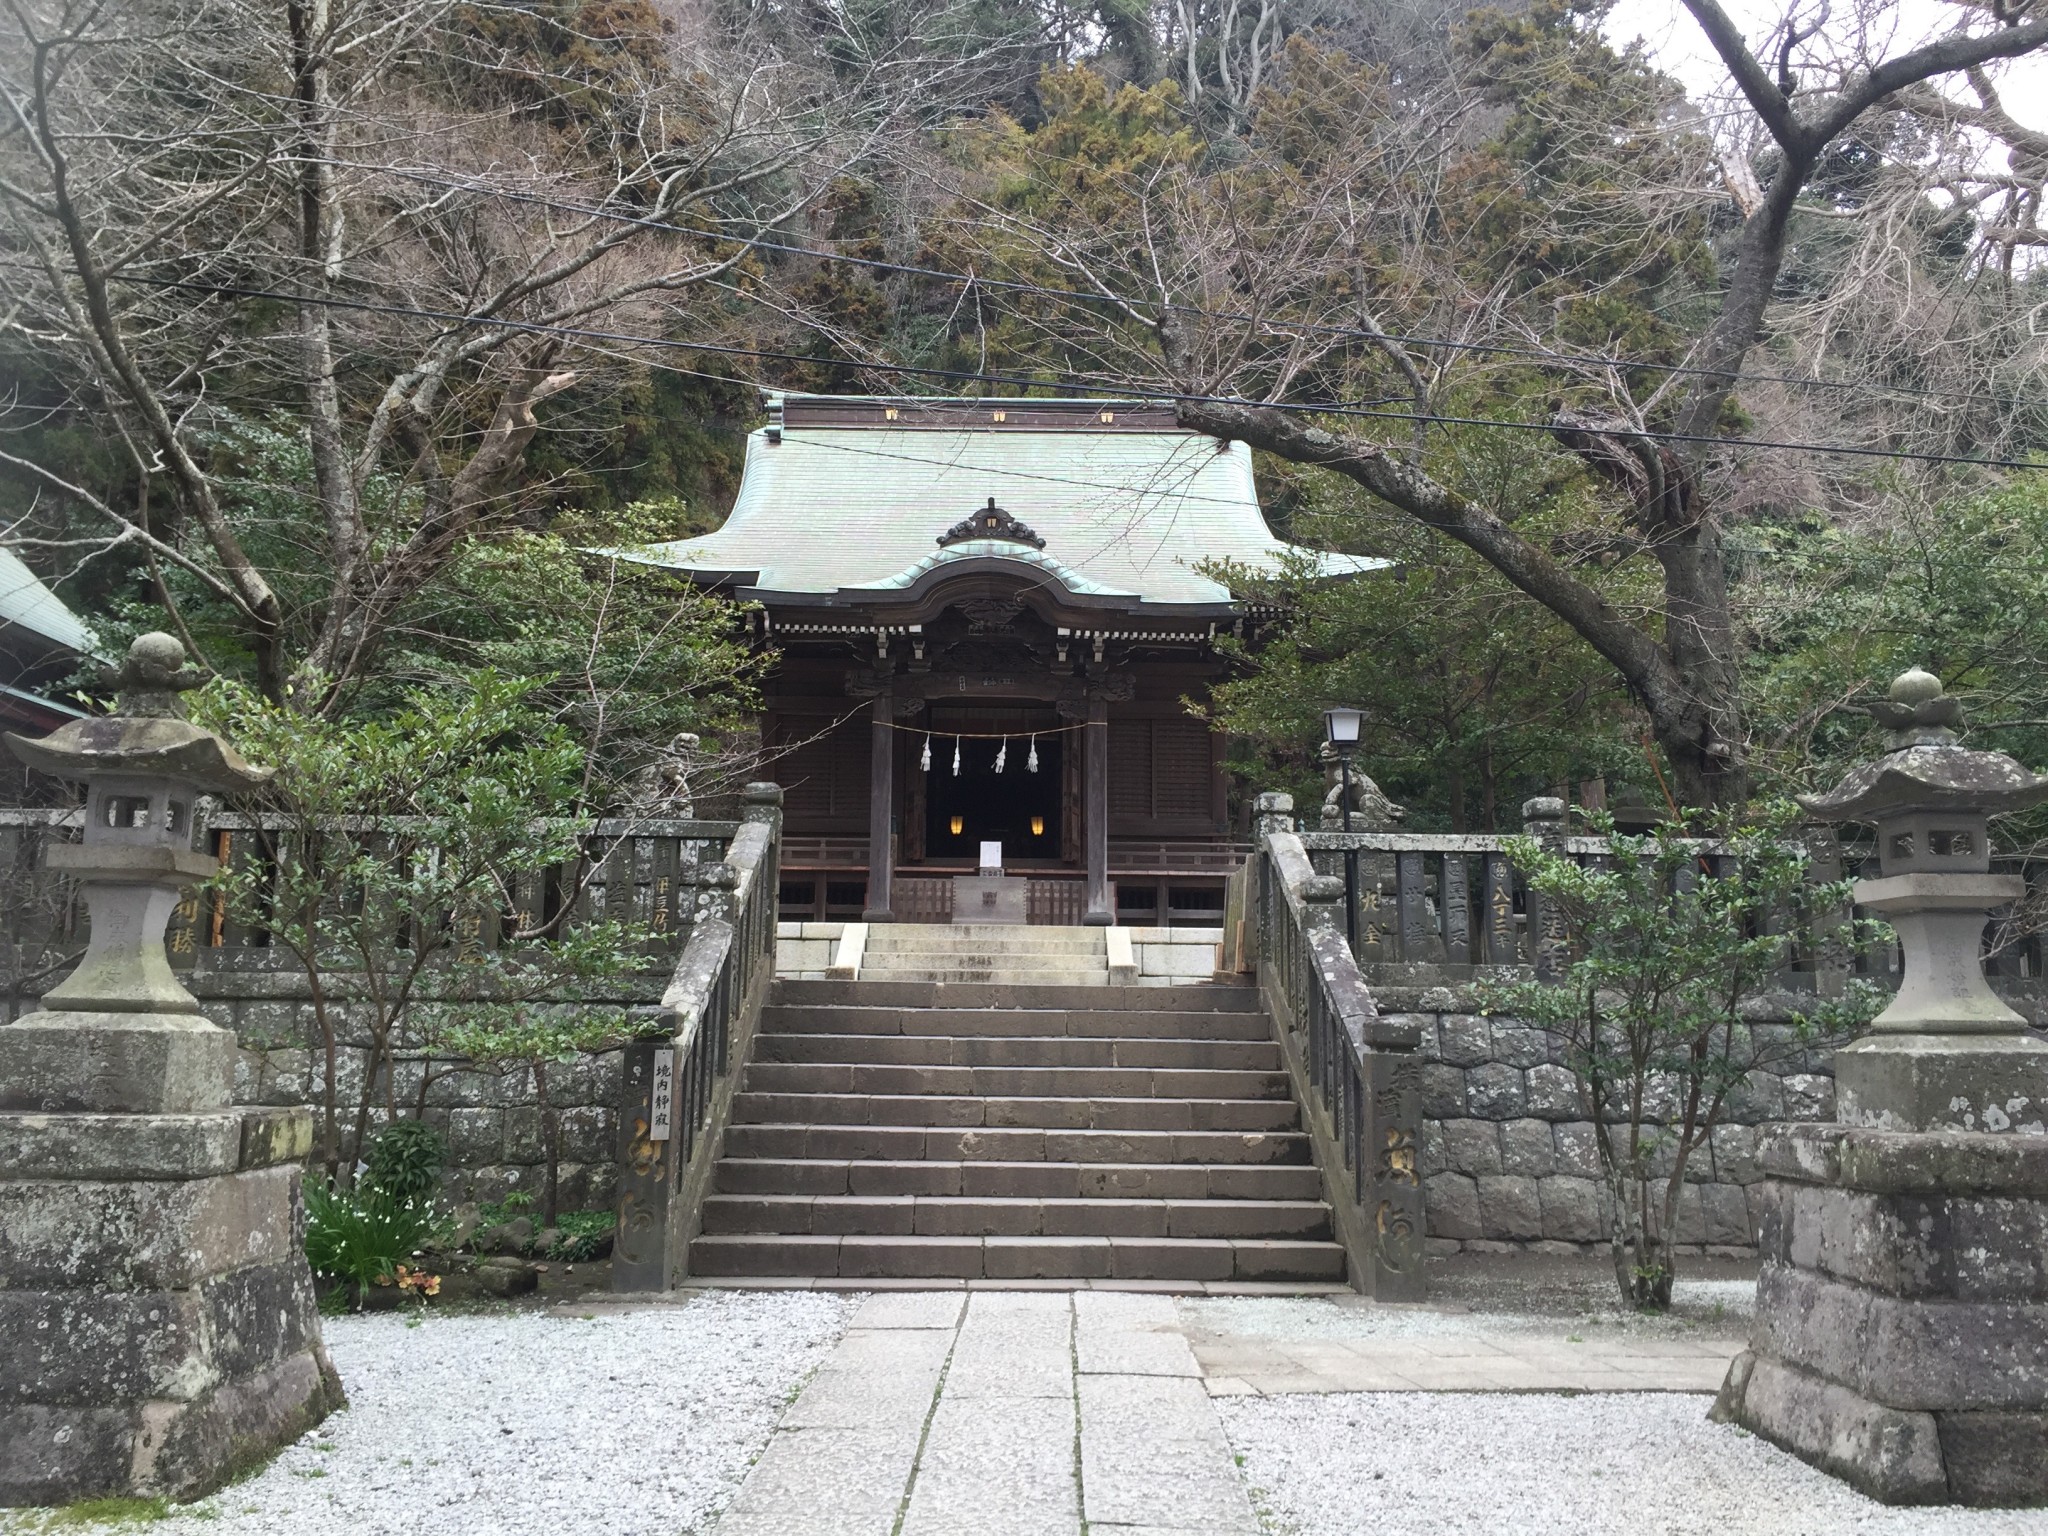 Goryo Shrine, a place for peaceful reflection in Kamakura